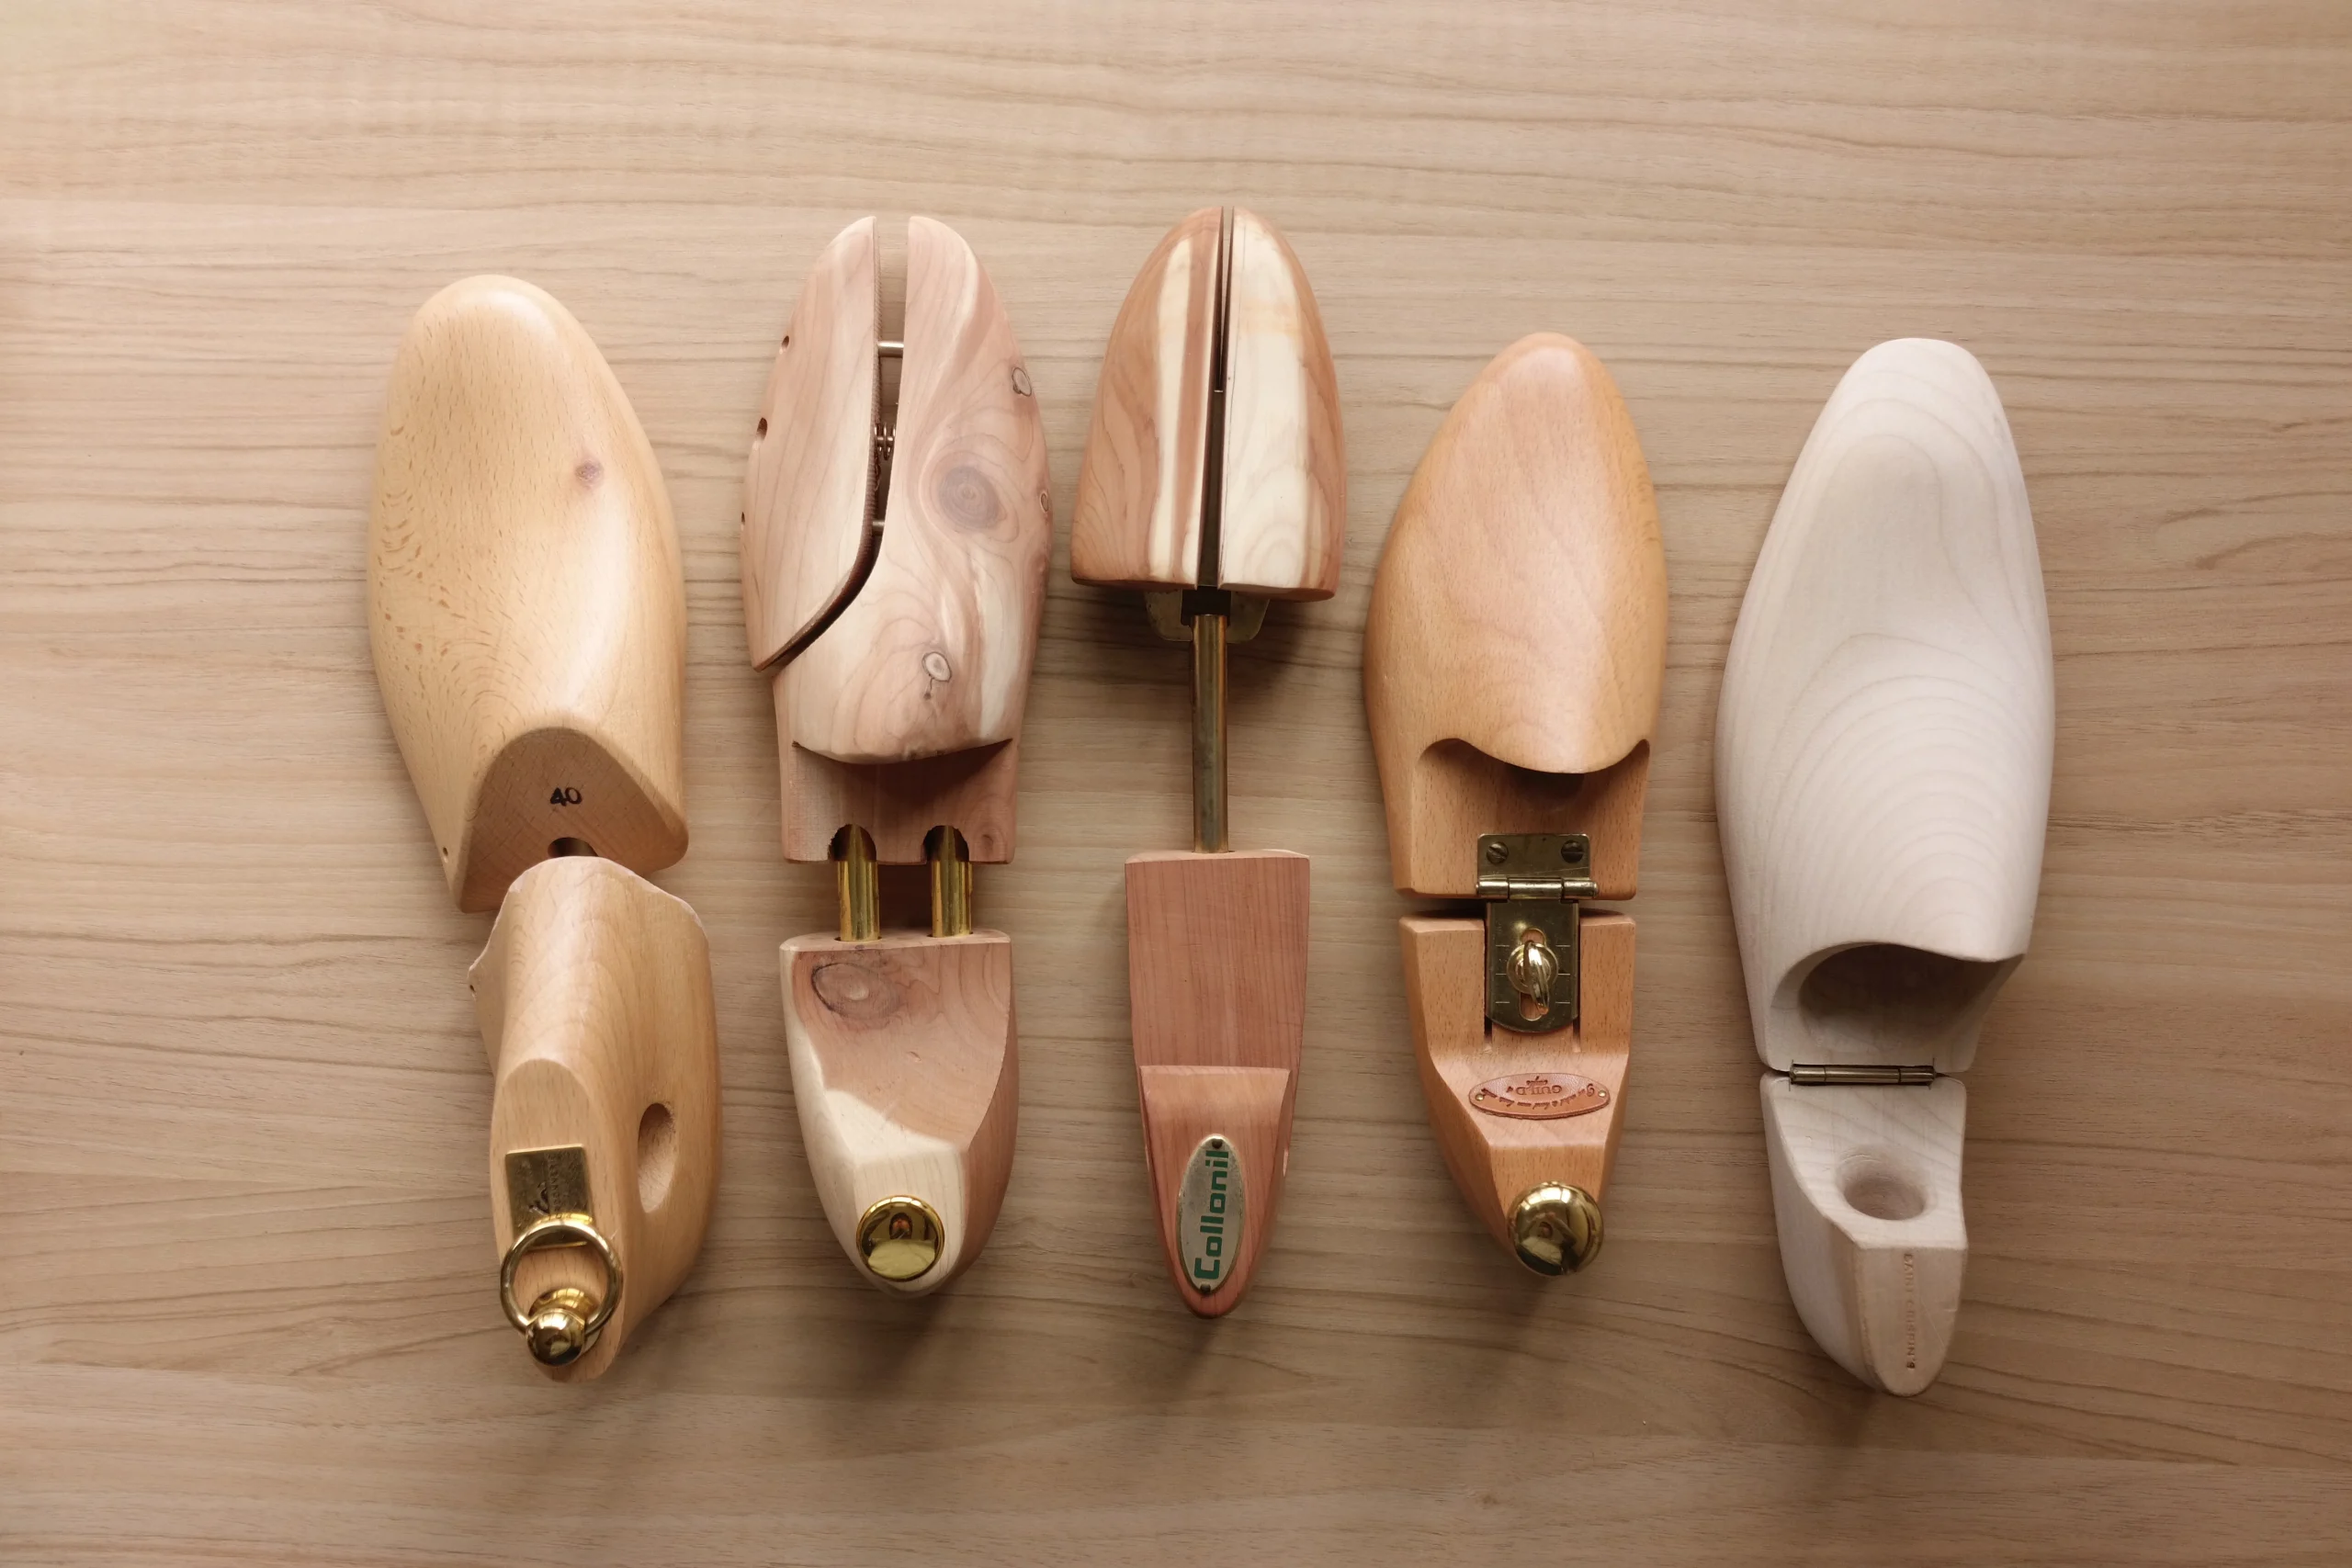 How To Use Shoe Trees